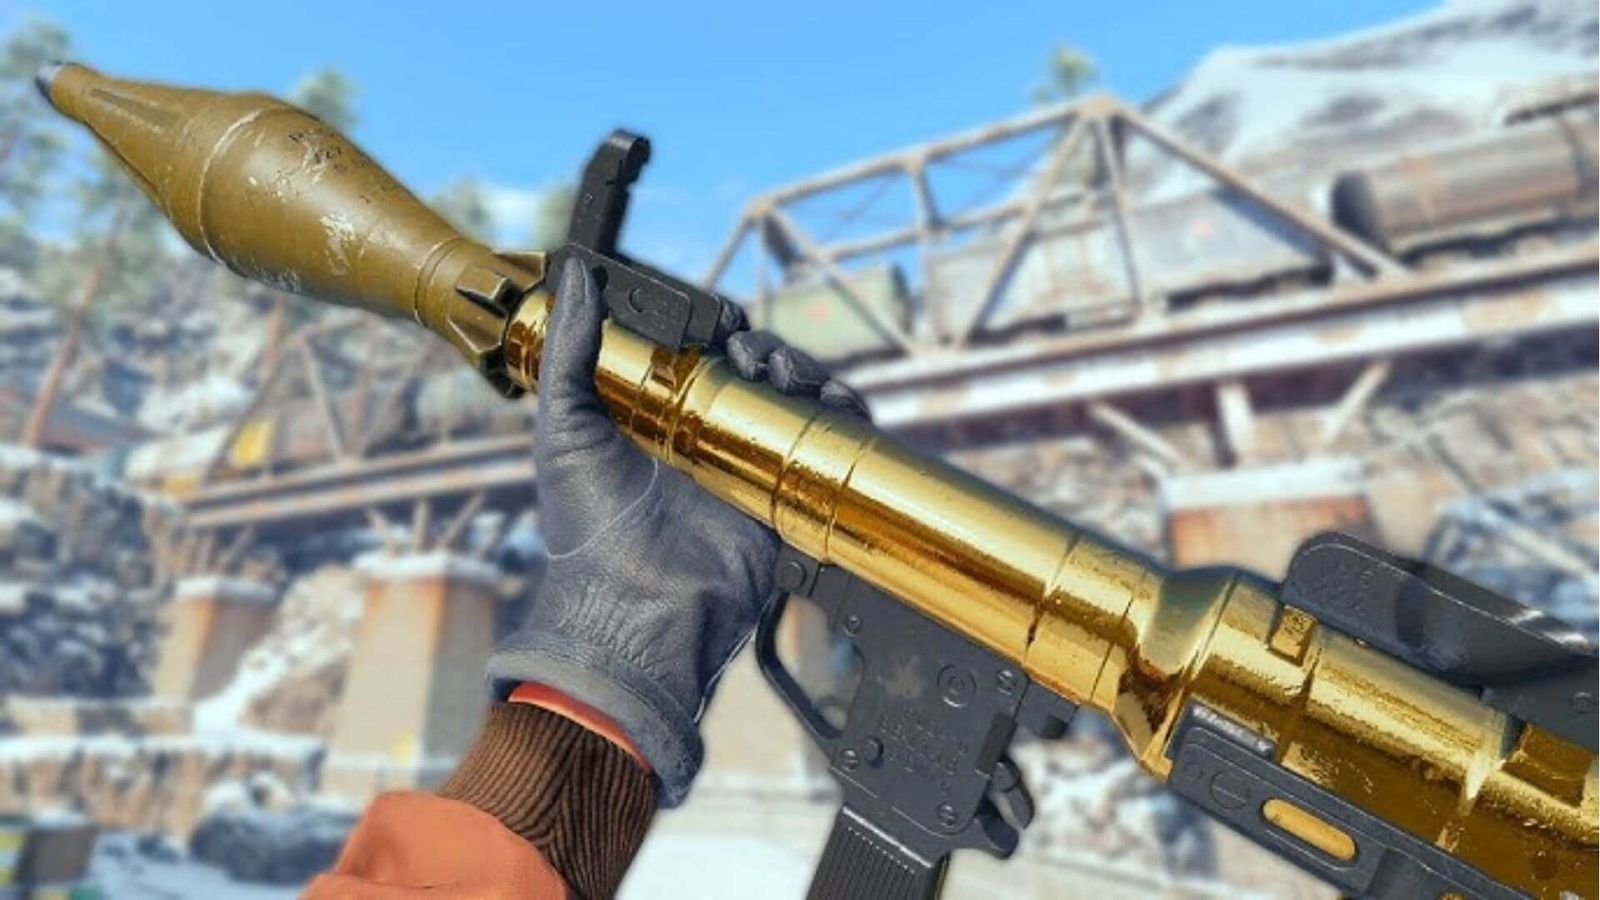 Image showing gold RPG-7 from Call of Duty